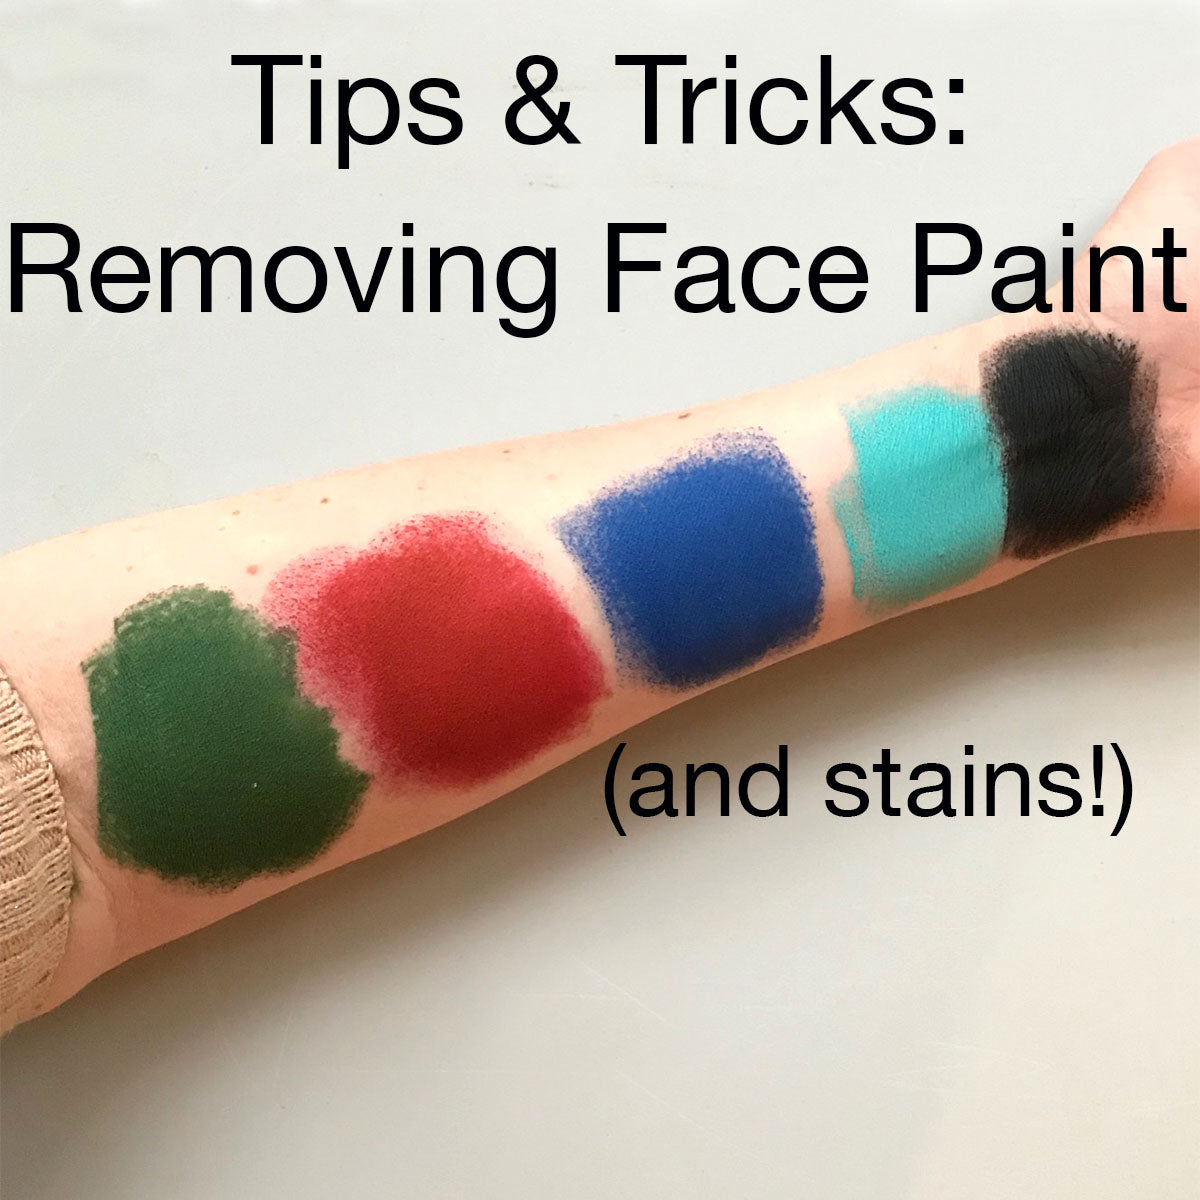 How To Remove Face Paint and Stains